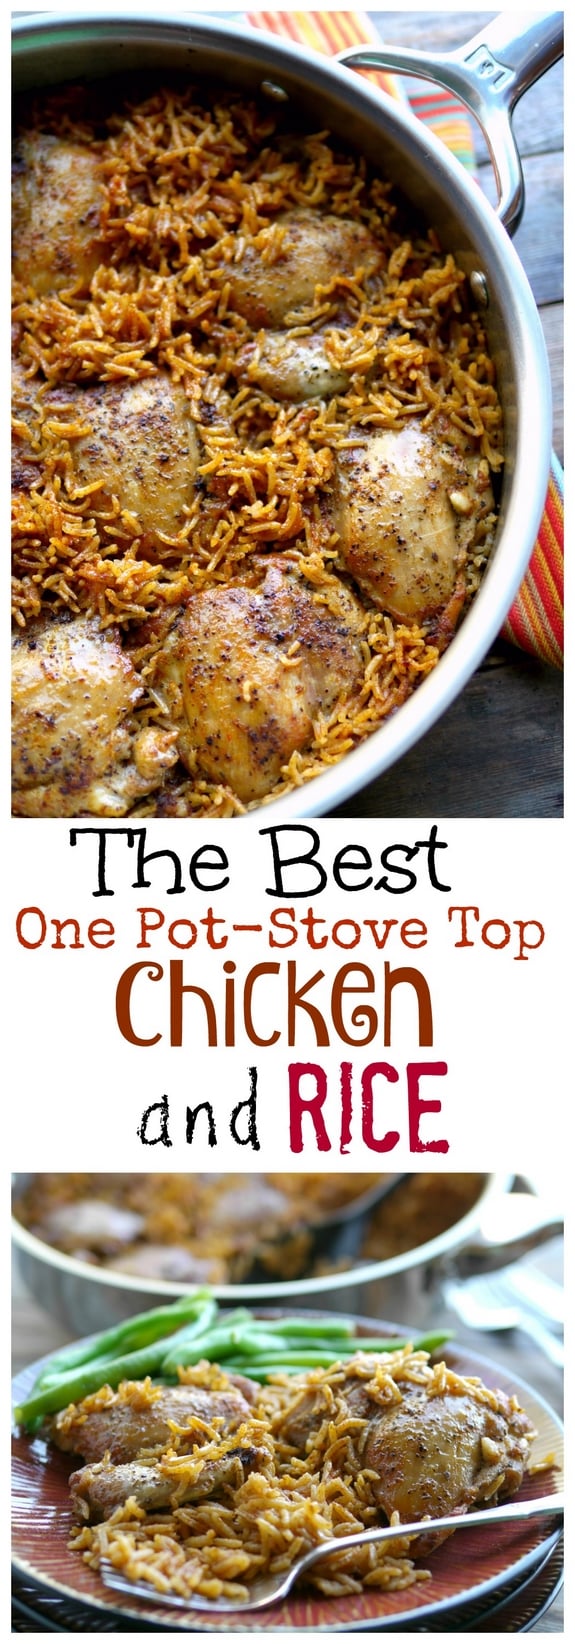 The Best One Pot Stove Top Chicken and Rice